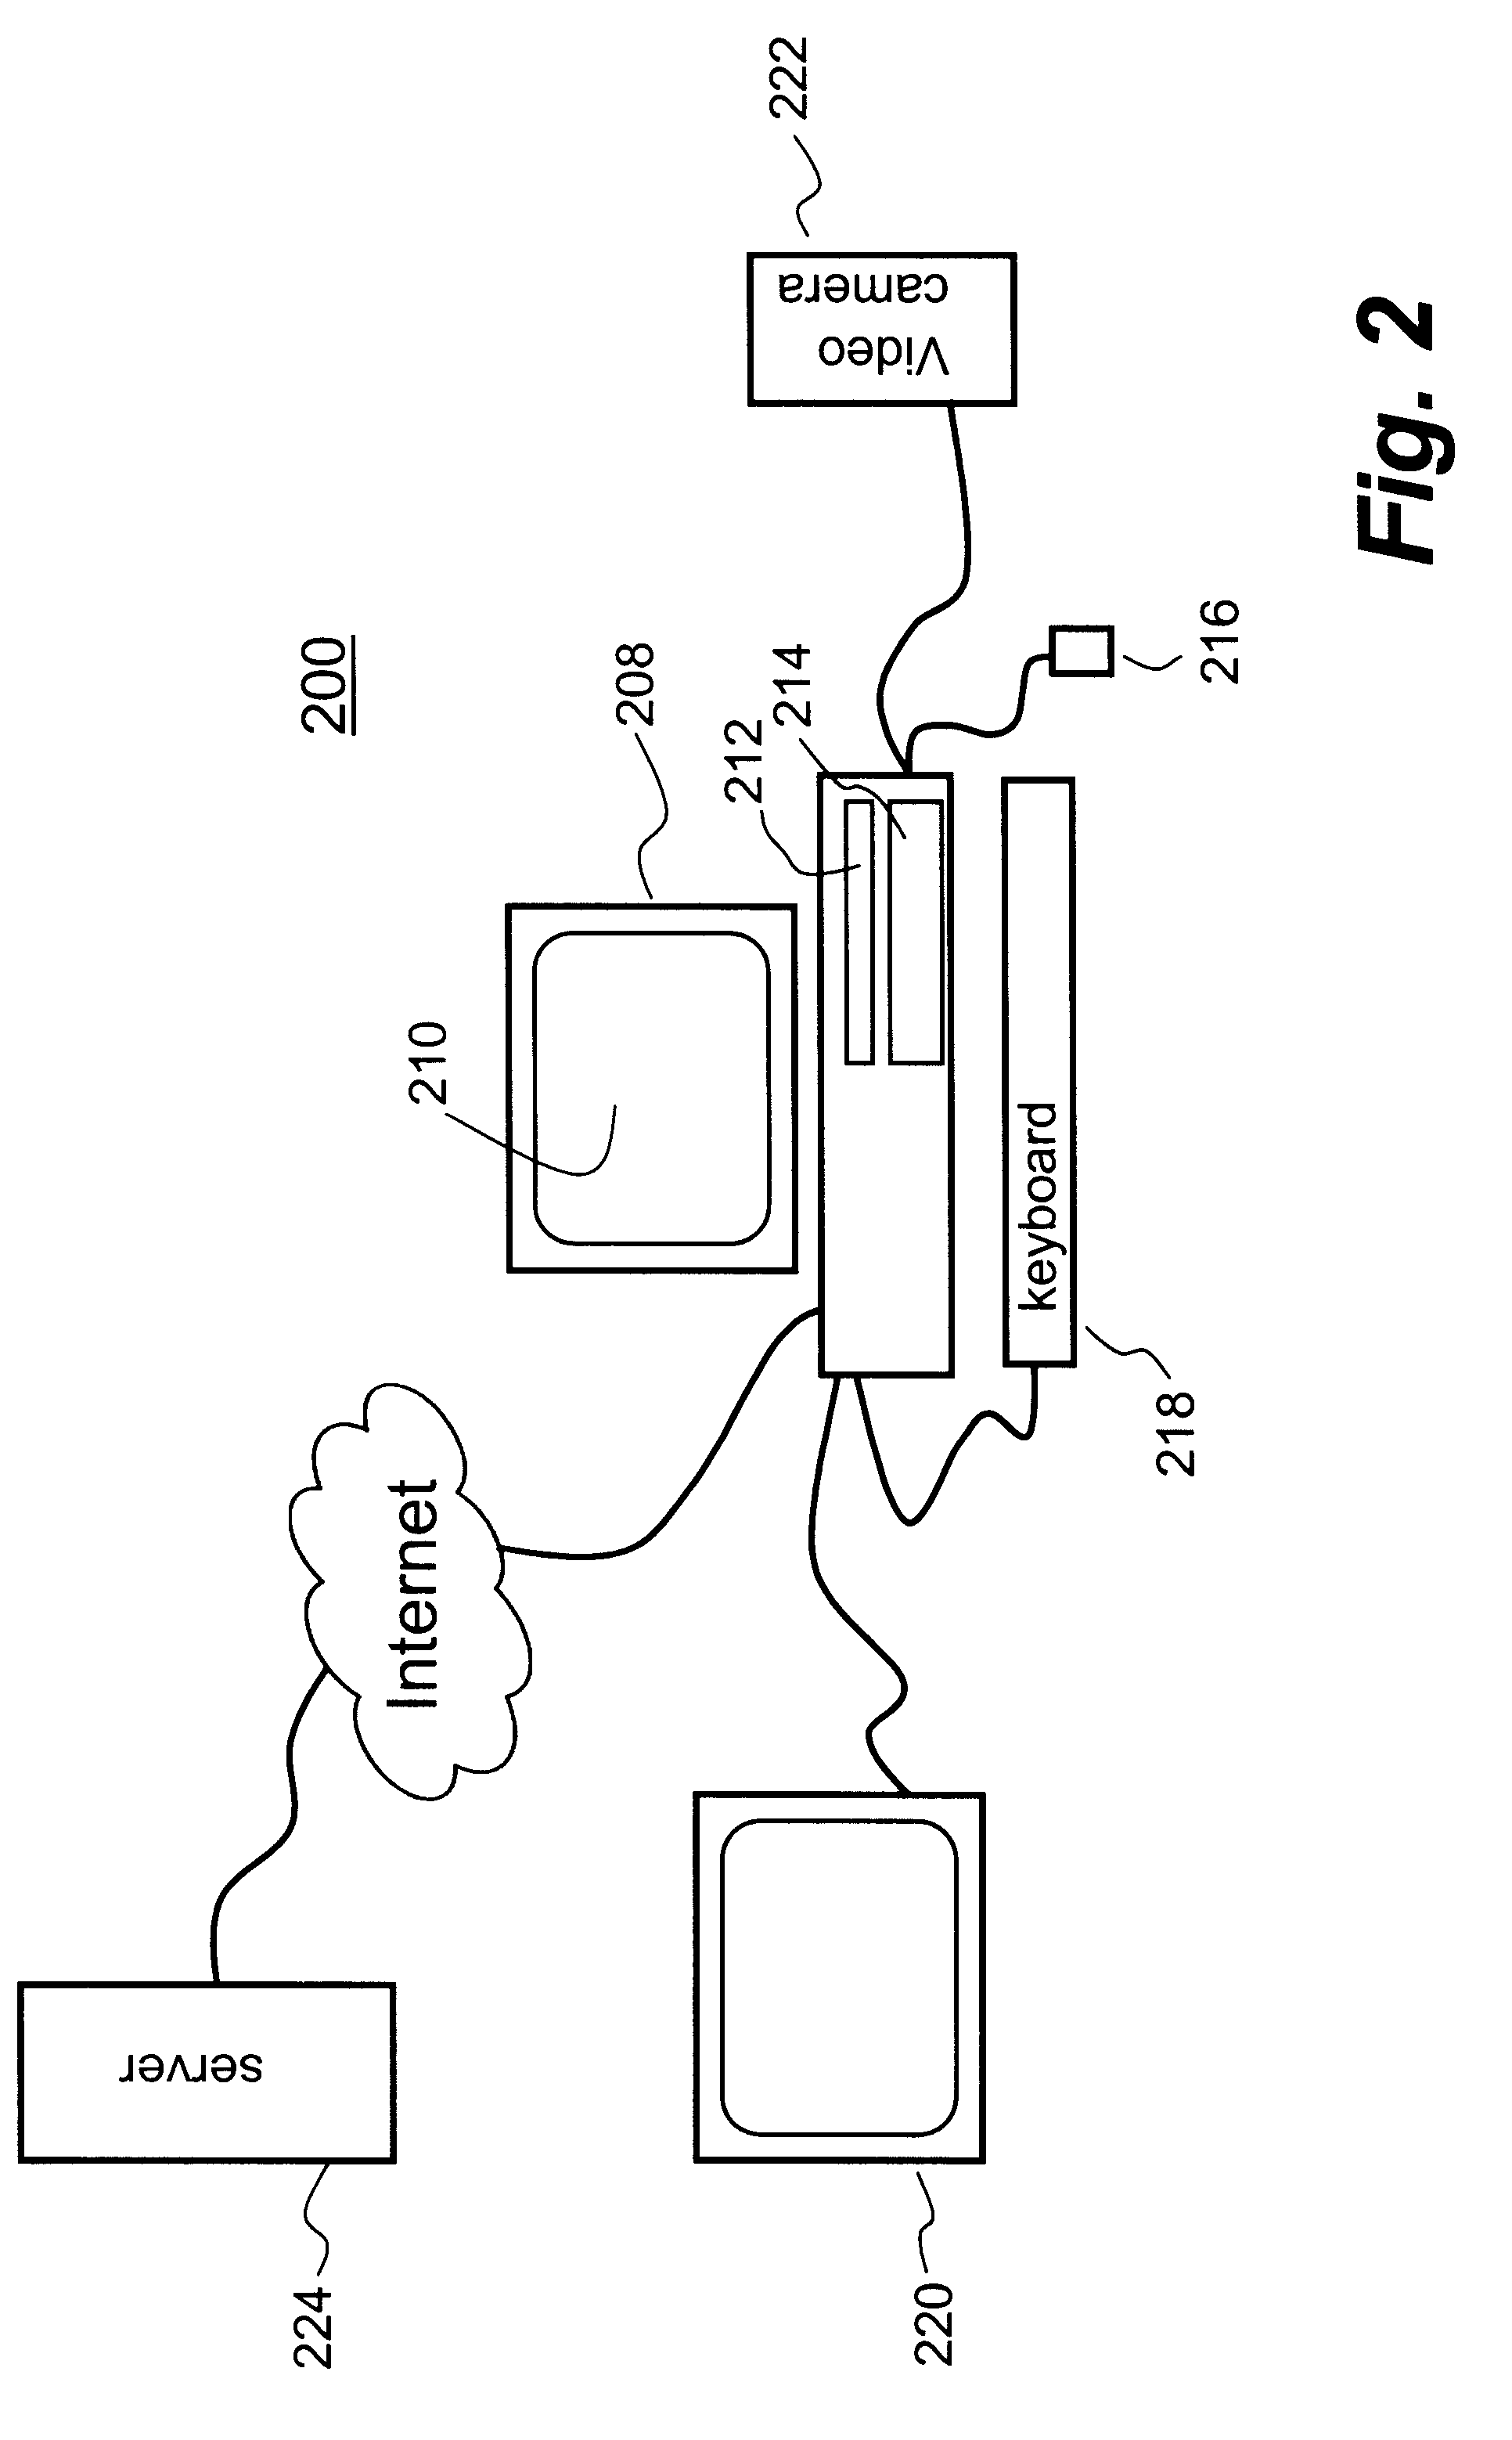 Method and apparatus for playing an MPEG data file backward